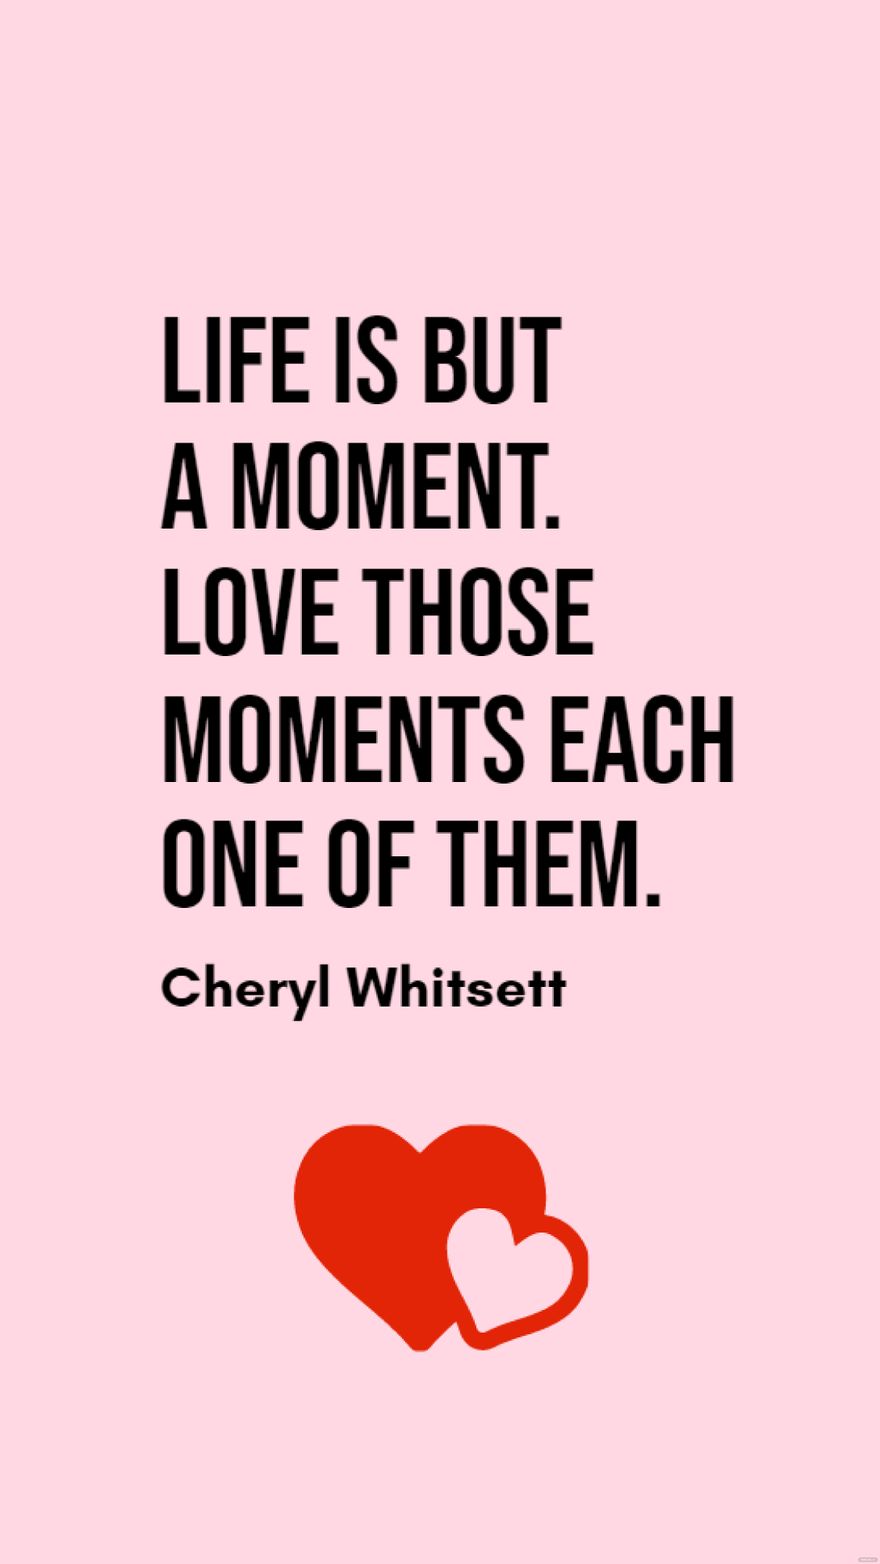 Free Cheryl Whitsett - Life is but a moment. Love those moments each one of them. in JPG